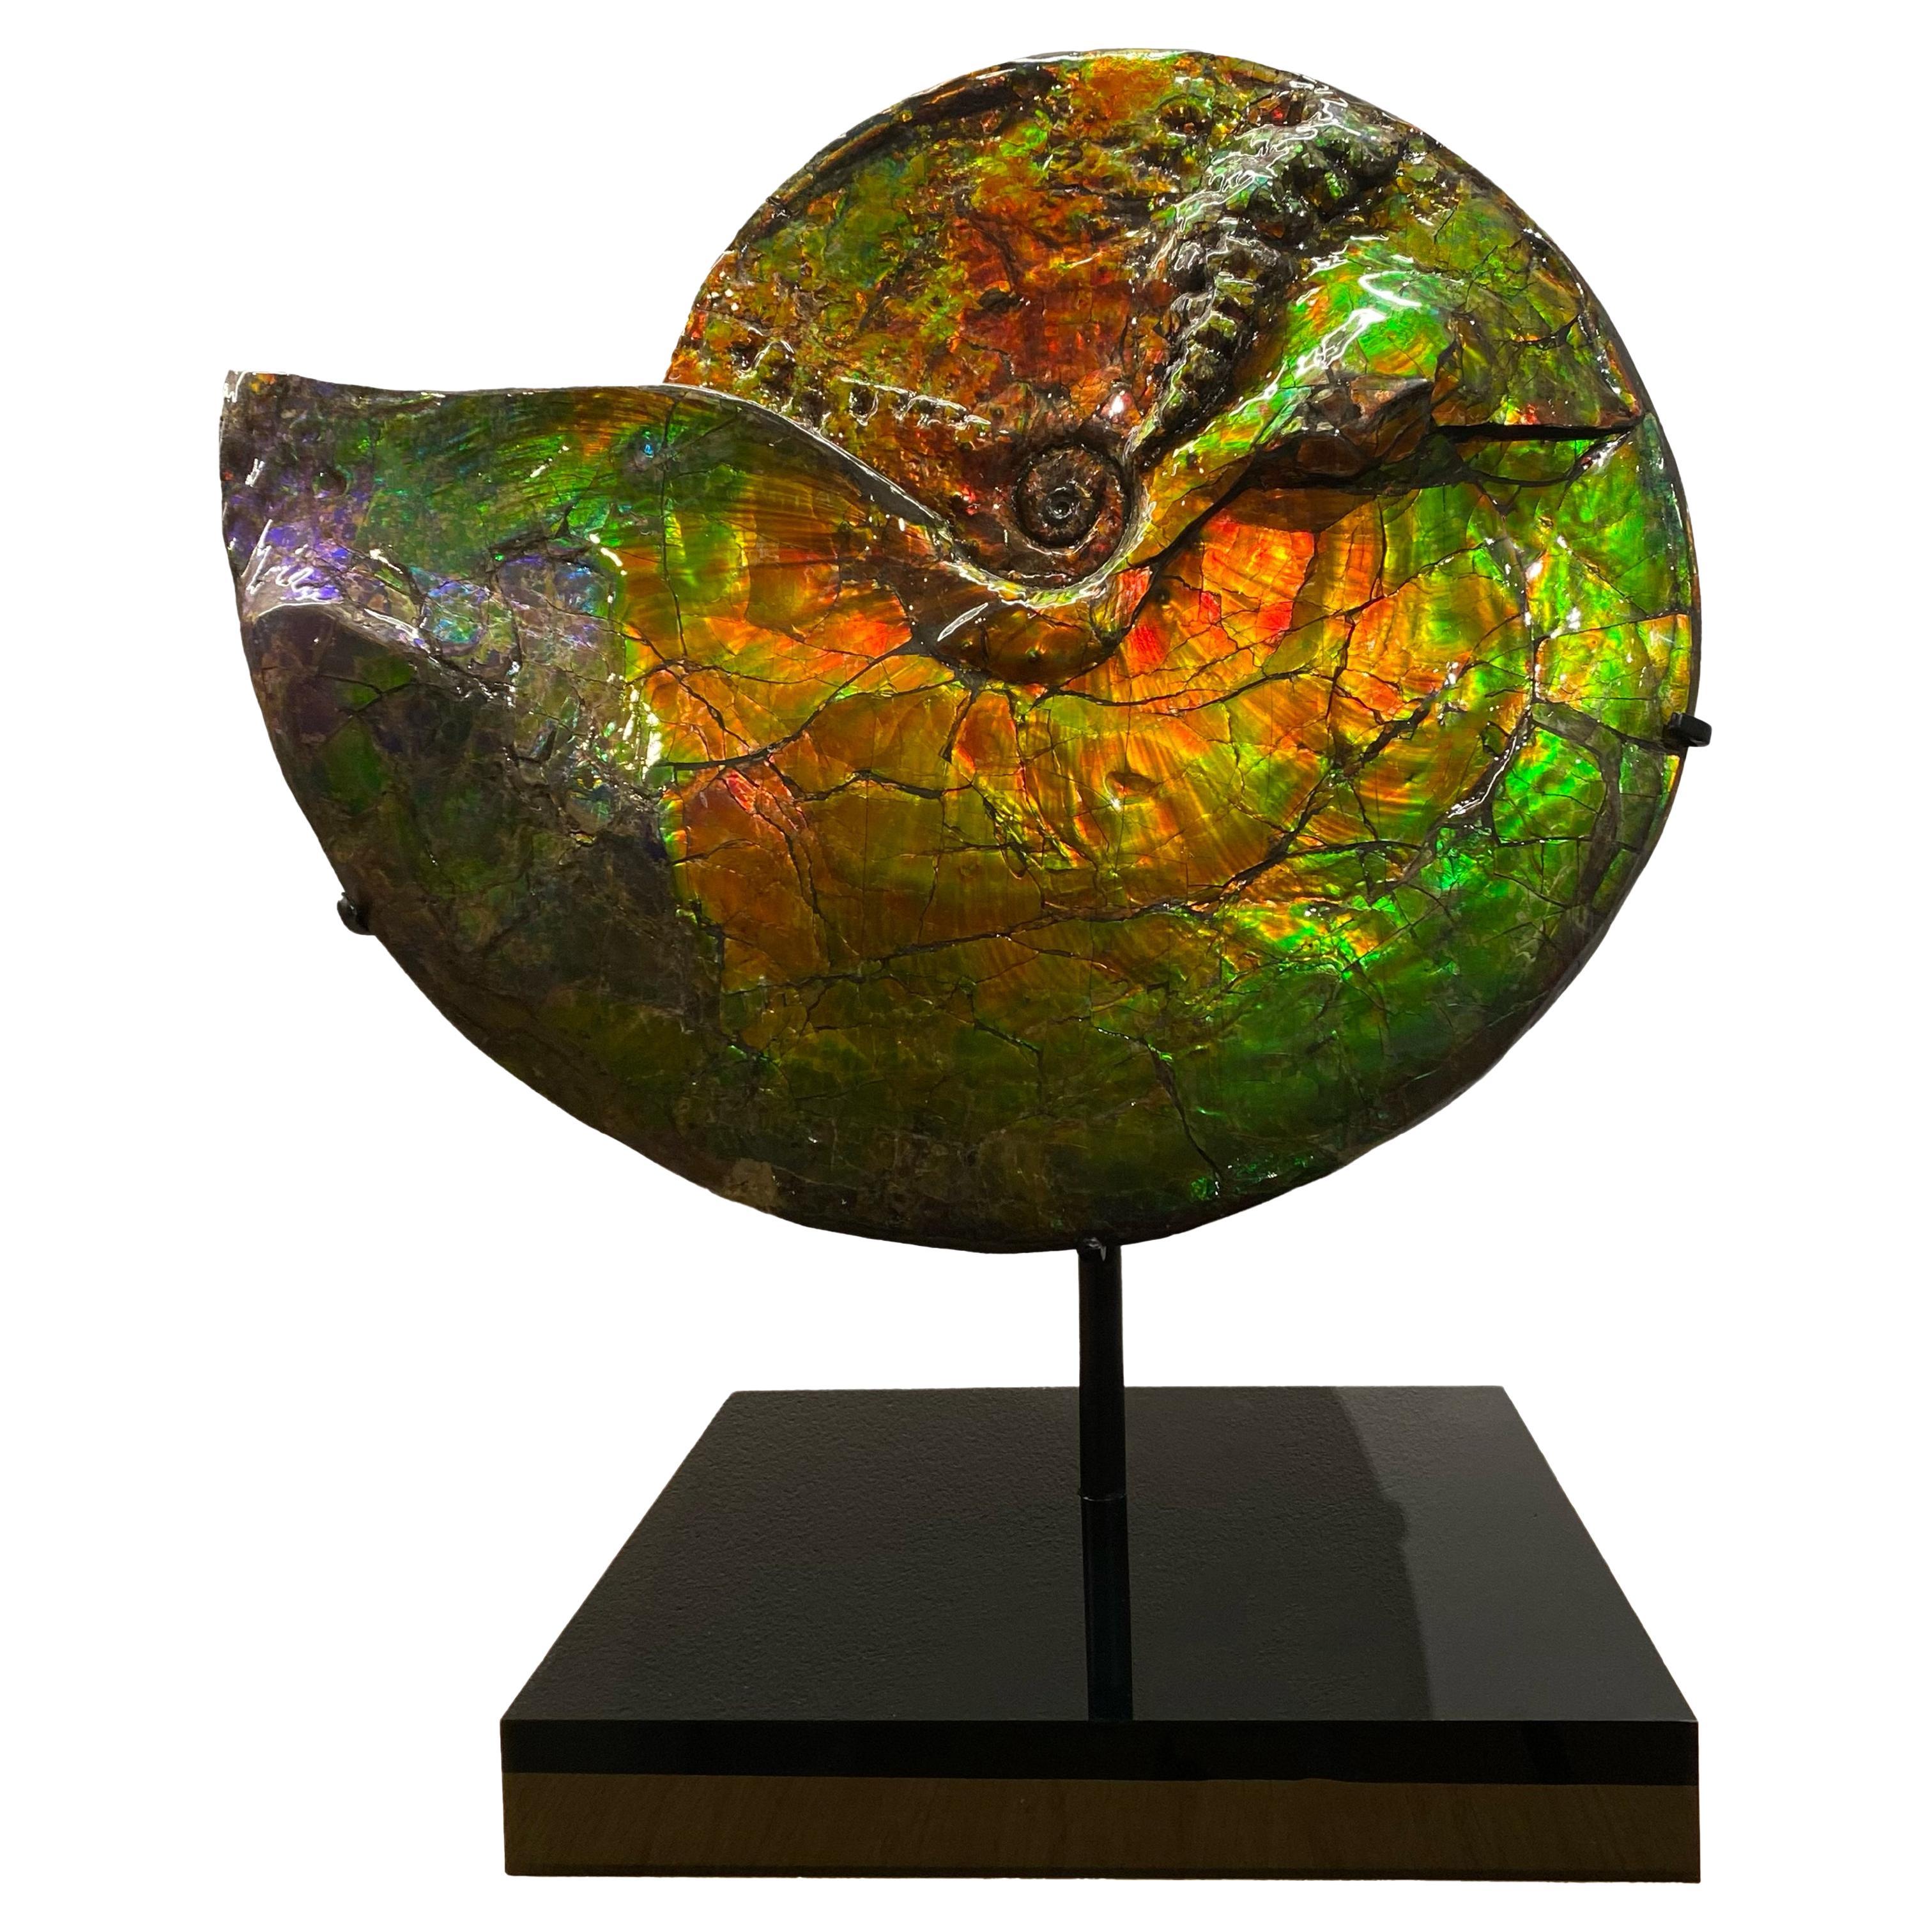 Rare Iridescent Ammonite Fossil with Blue, Green, Red and Orange Hues. For Sale